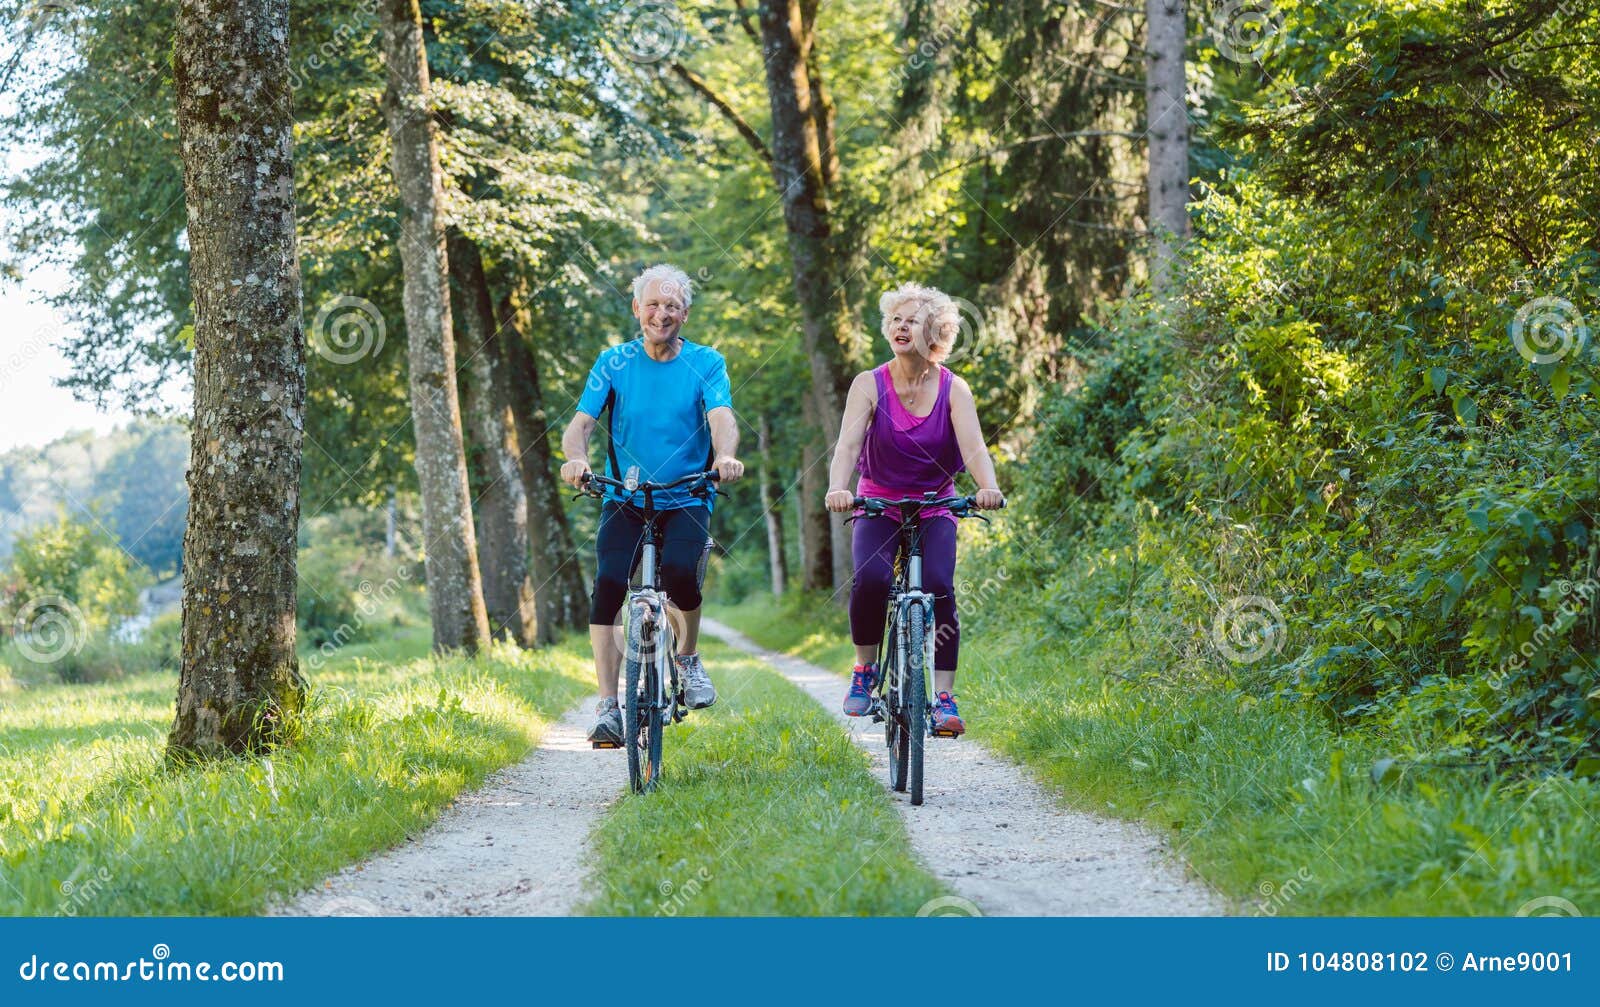 happy and active senior couple riding bicycles outdoors in the p